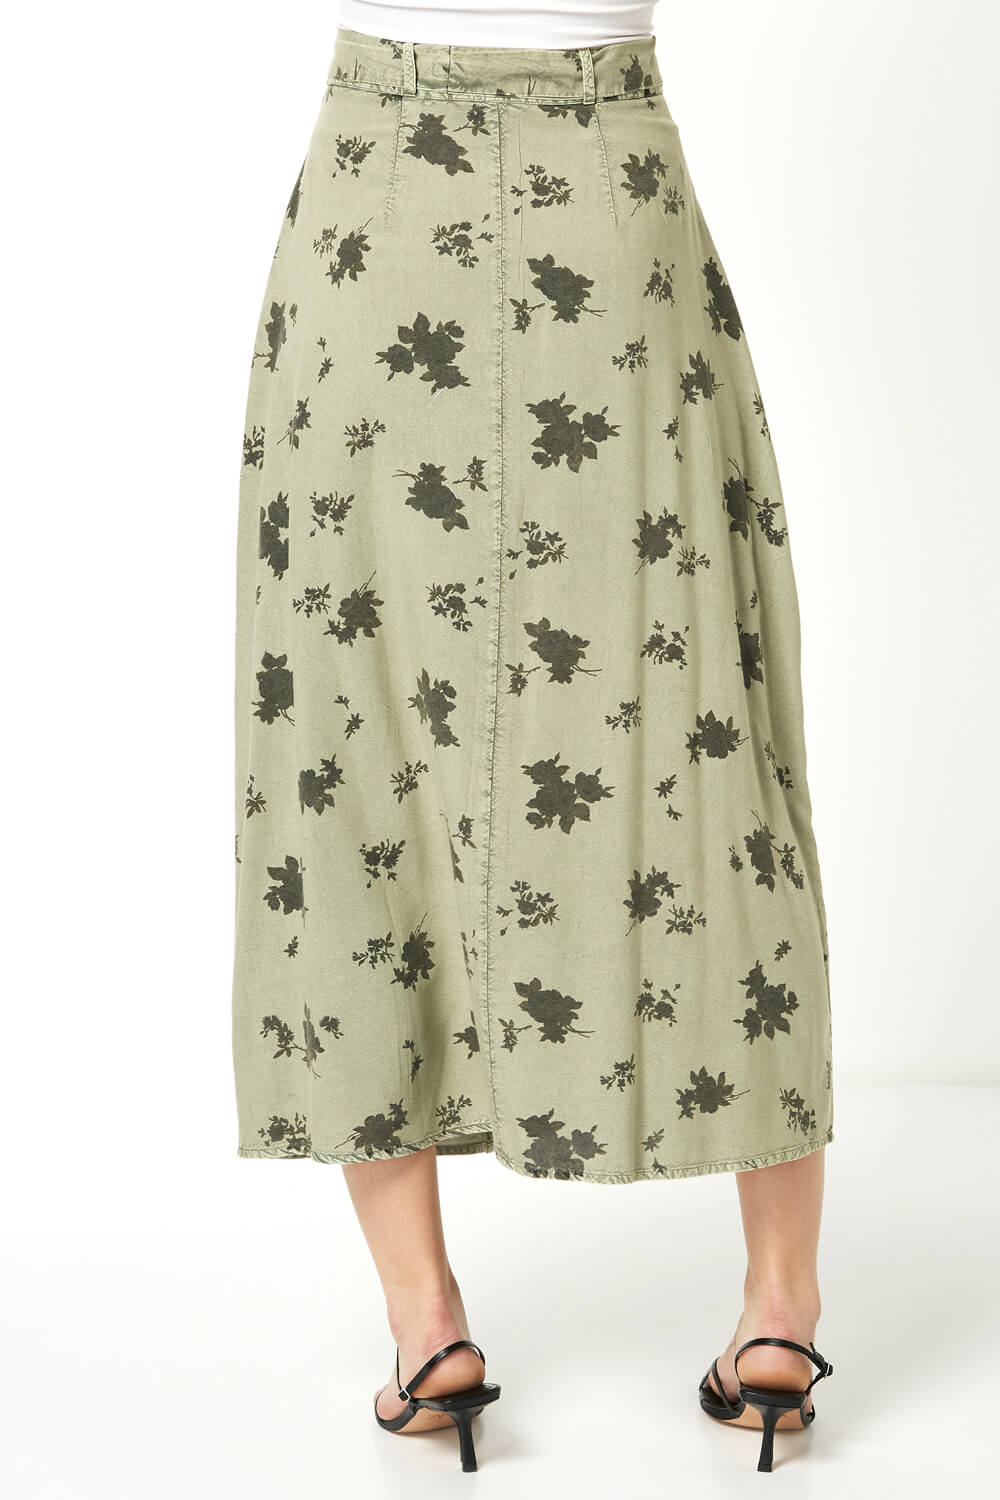 KHAKI Floral Print Button Front Skirt, Image 2 of 5